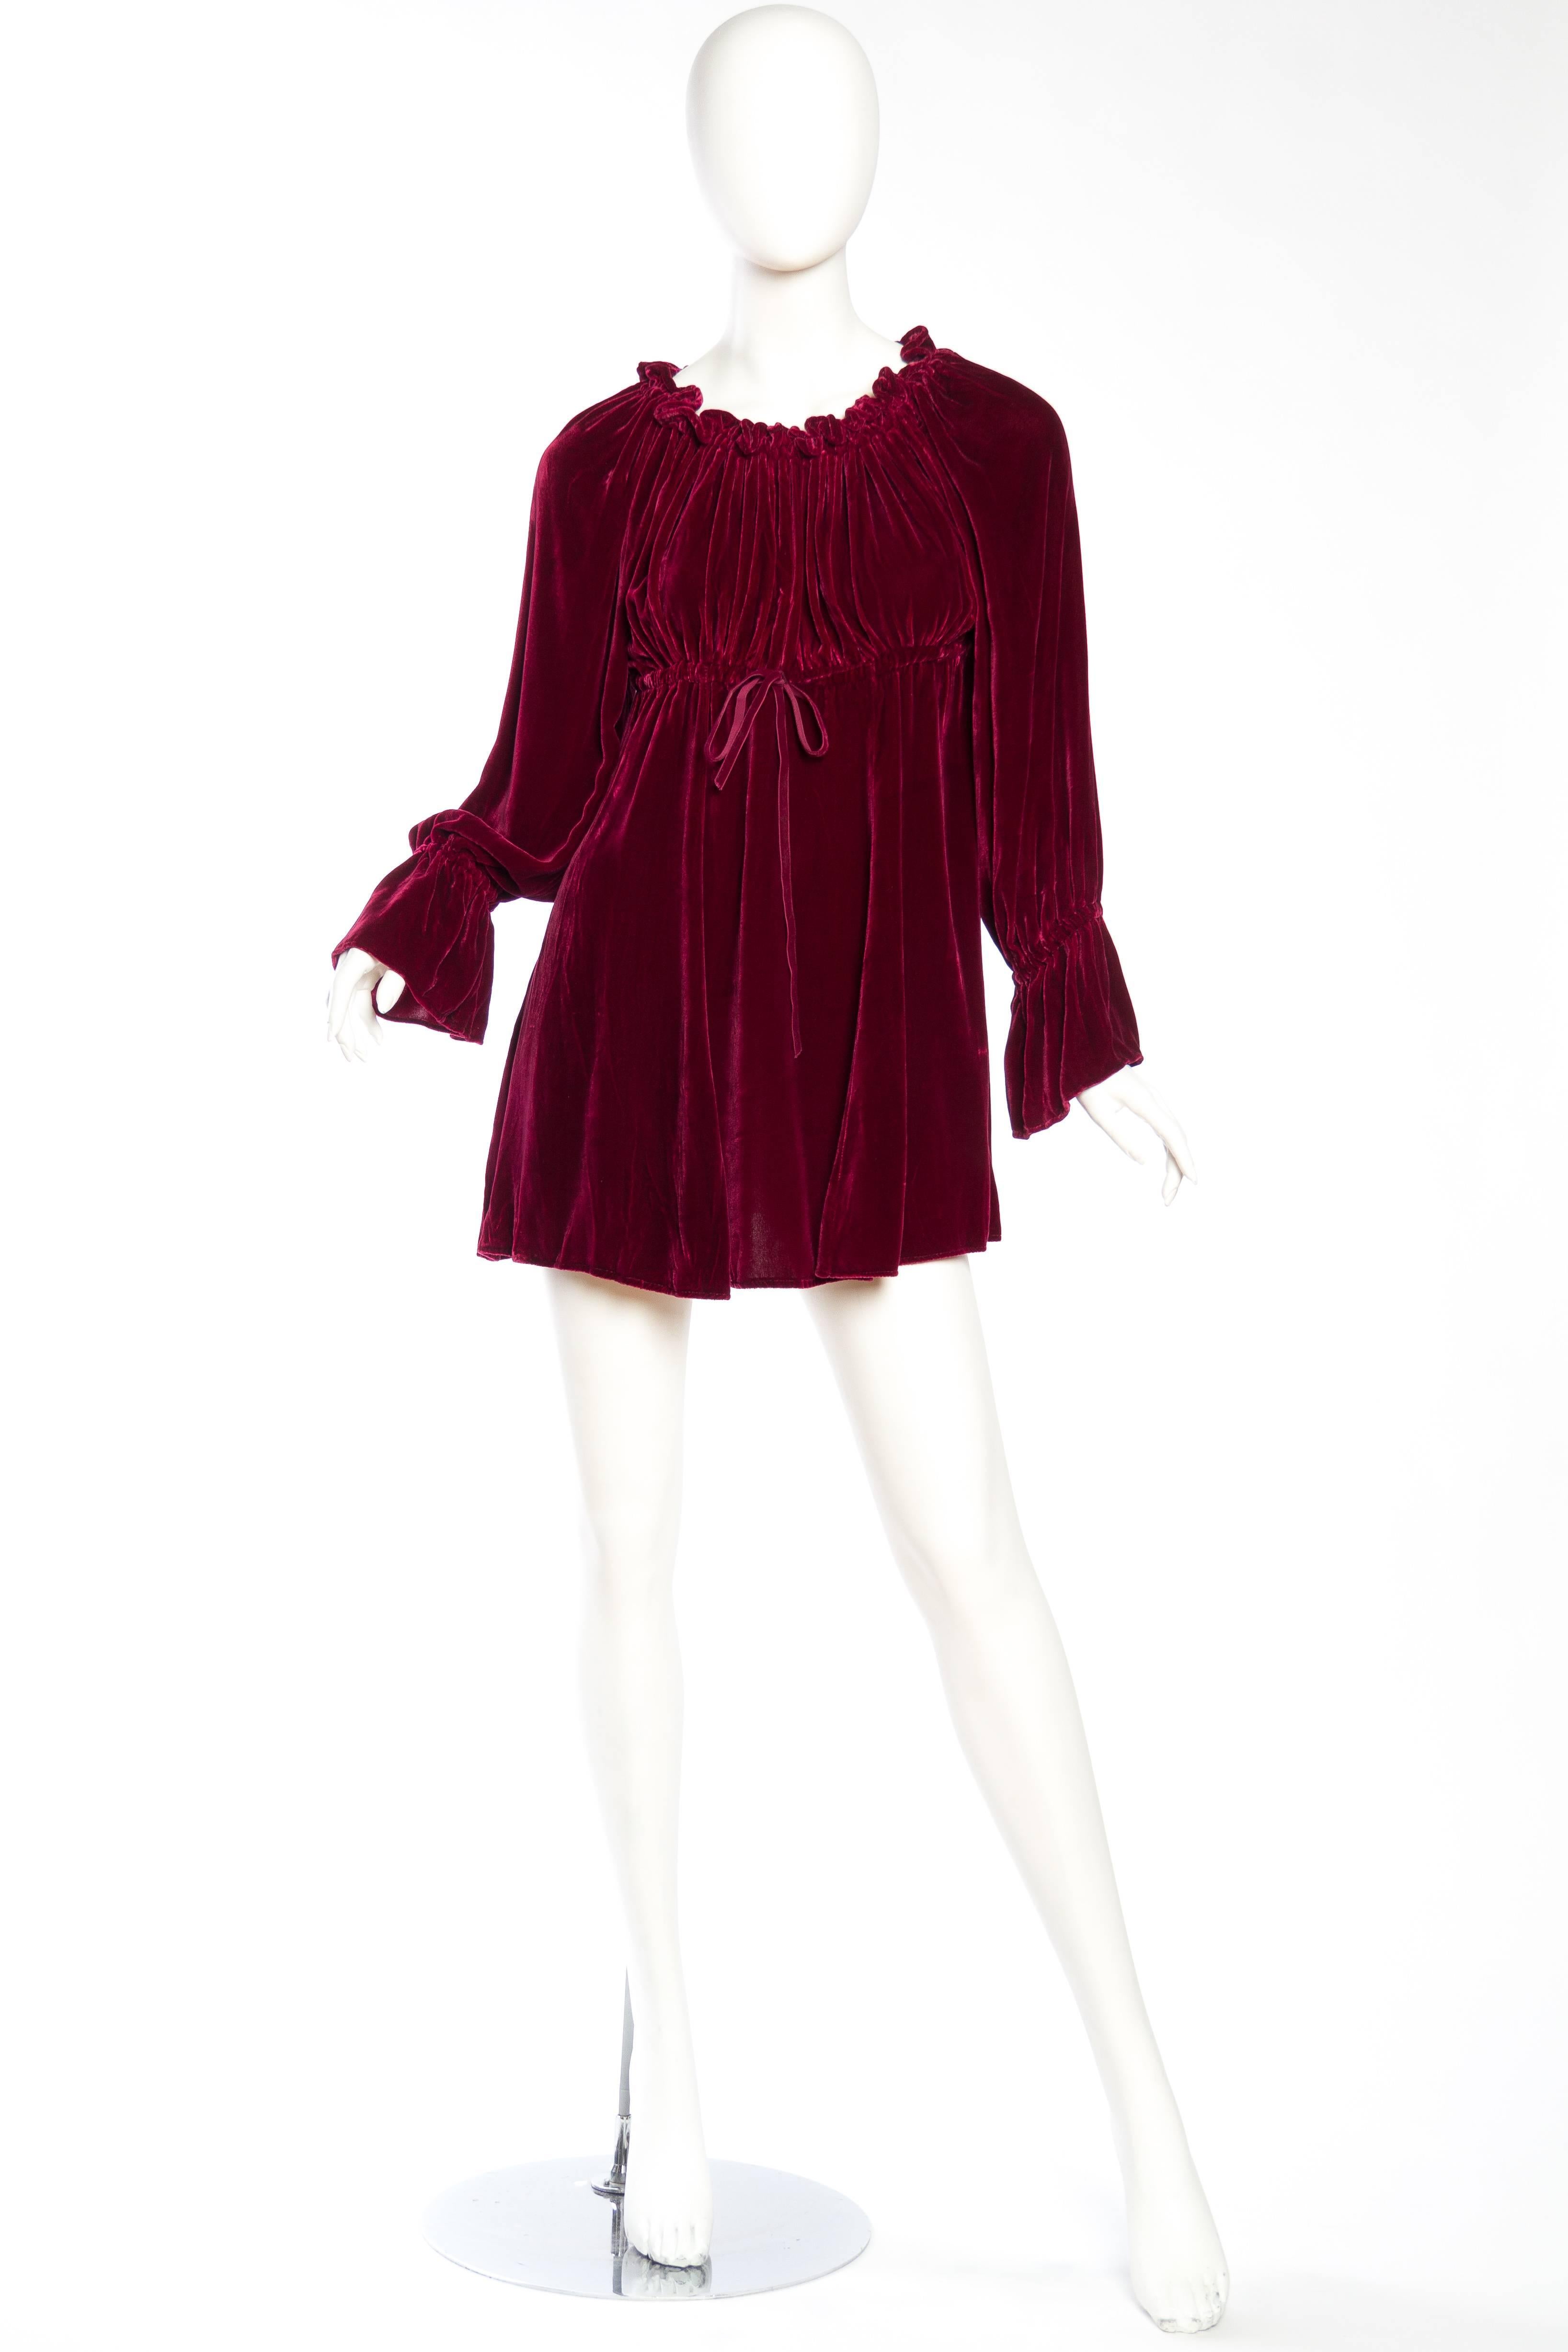 This is a funny little dress. We bought it in Paris, with a French label, which says made in the USA. The style is total swinging 1960s rock and roll Paris however it dates from the 1990s. The velvet is luscious and more reminicent of the 1930s than